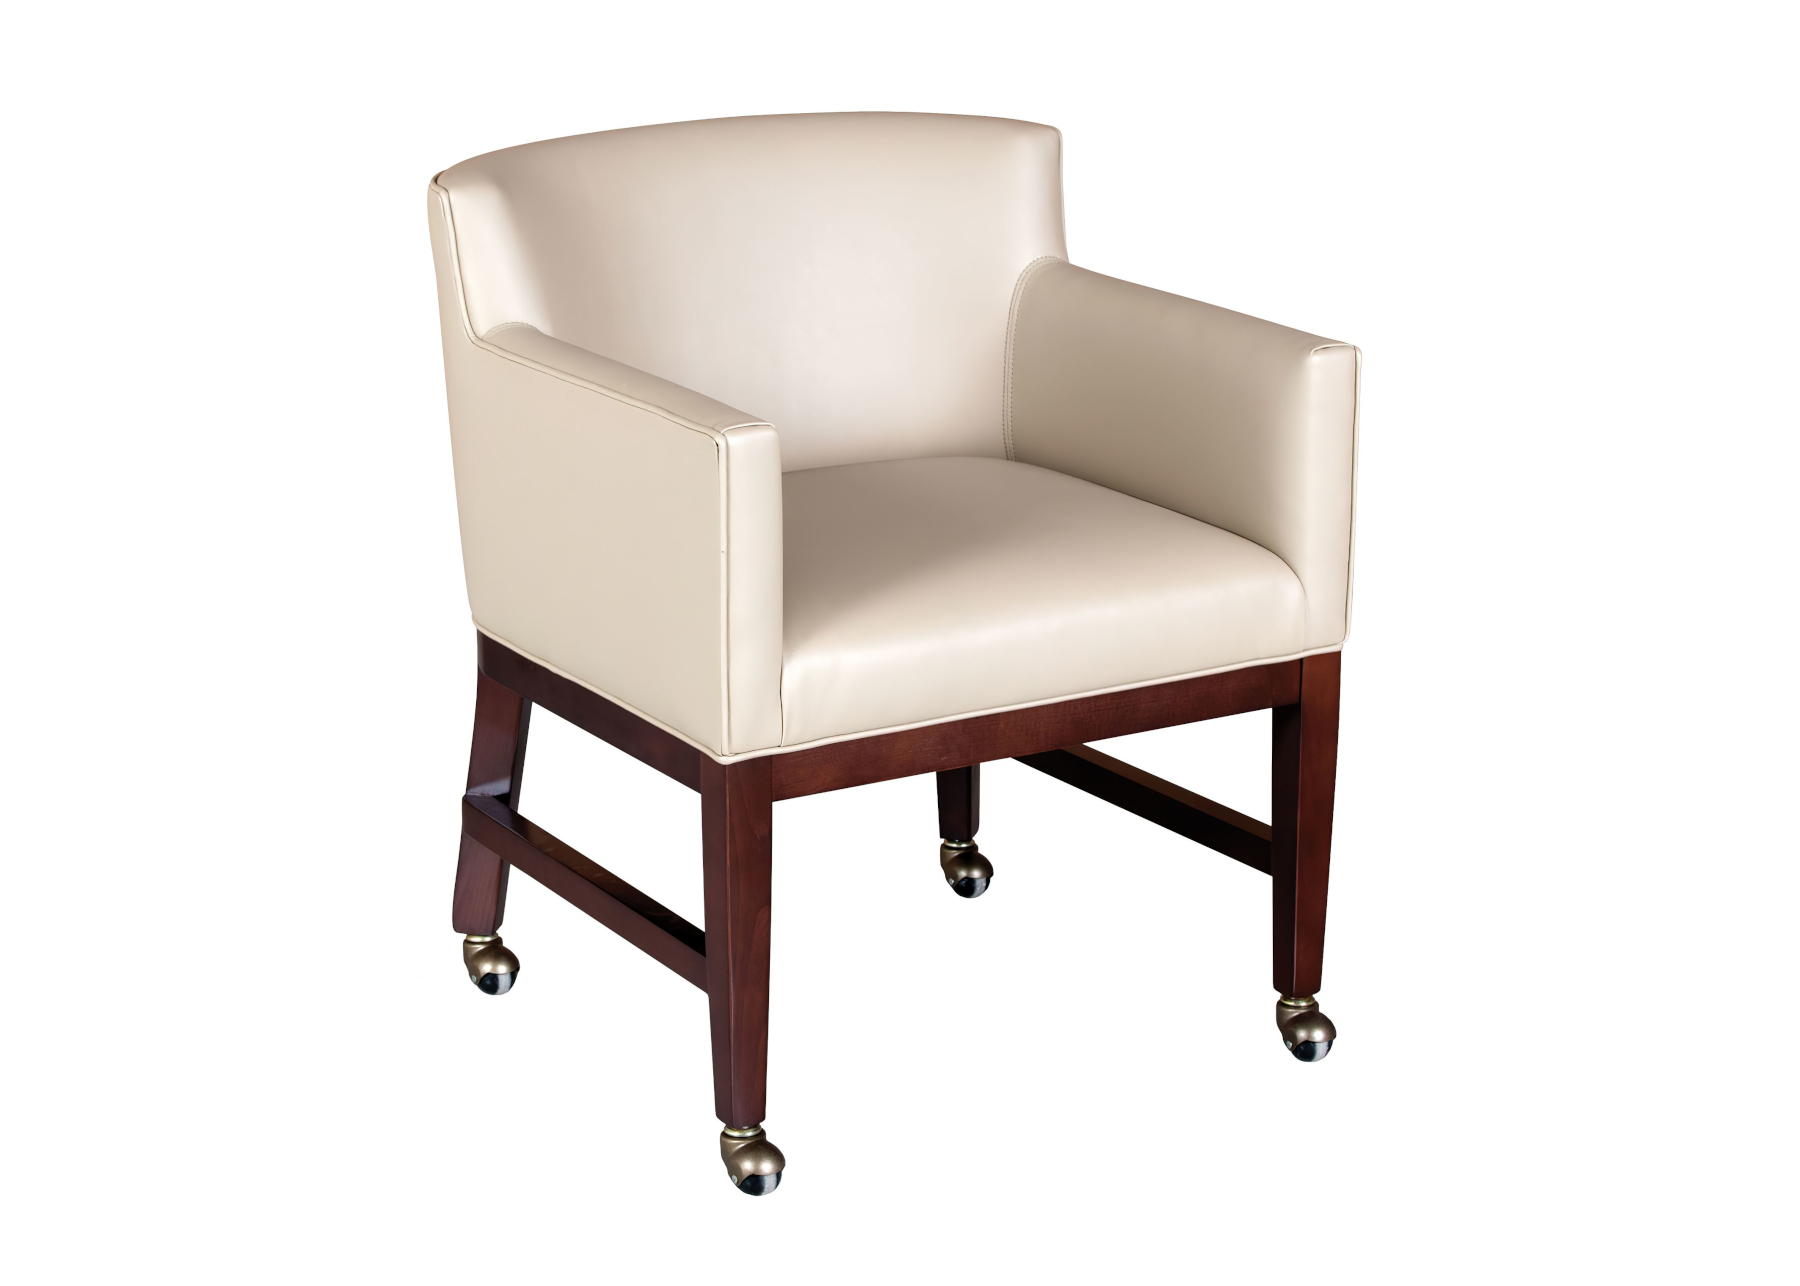  KENDALL CHAIR W/CASTERS